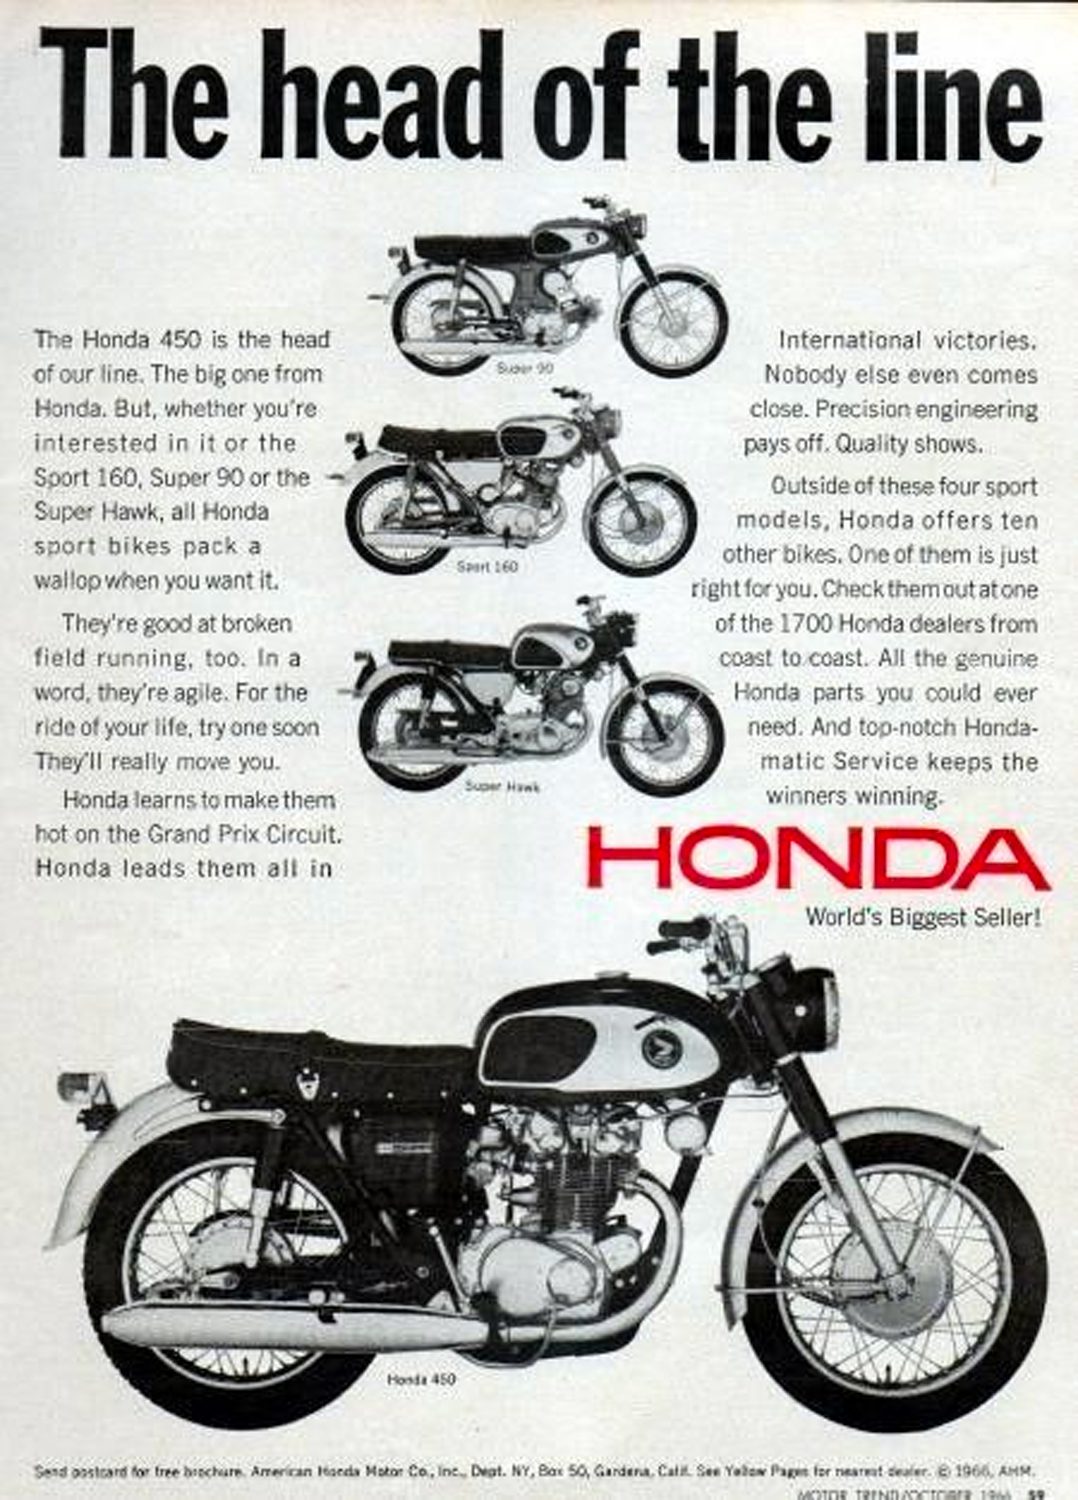 A Honda CB450 motorcycle ad from the mid 1960s